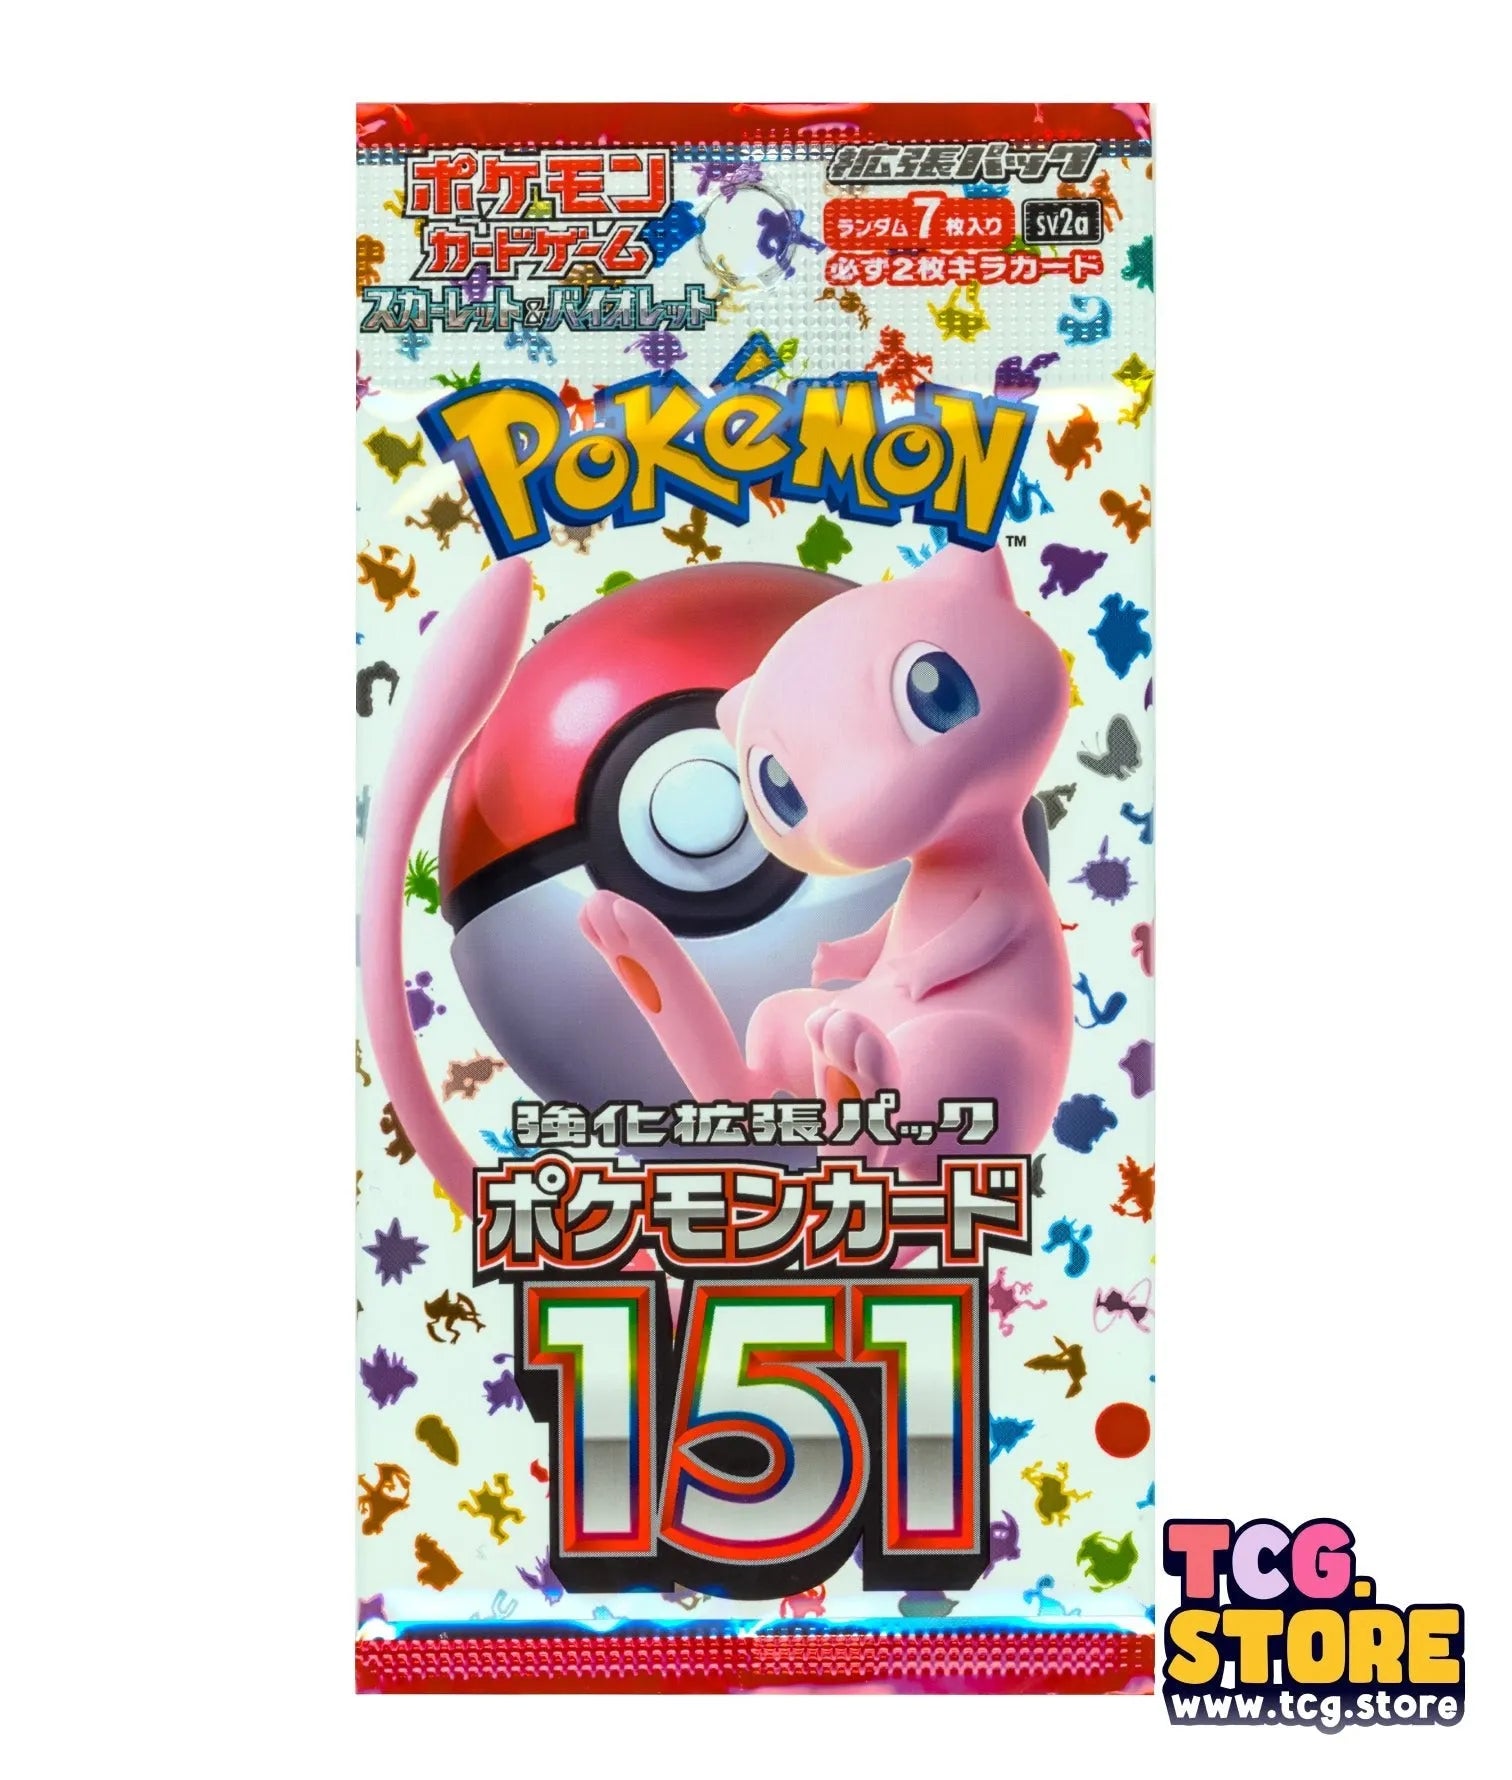 1 Pack - Pokémon 151 Booster Pack Sv2a (7 cards) - Japanese - Sealed - TCG.Store